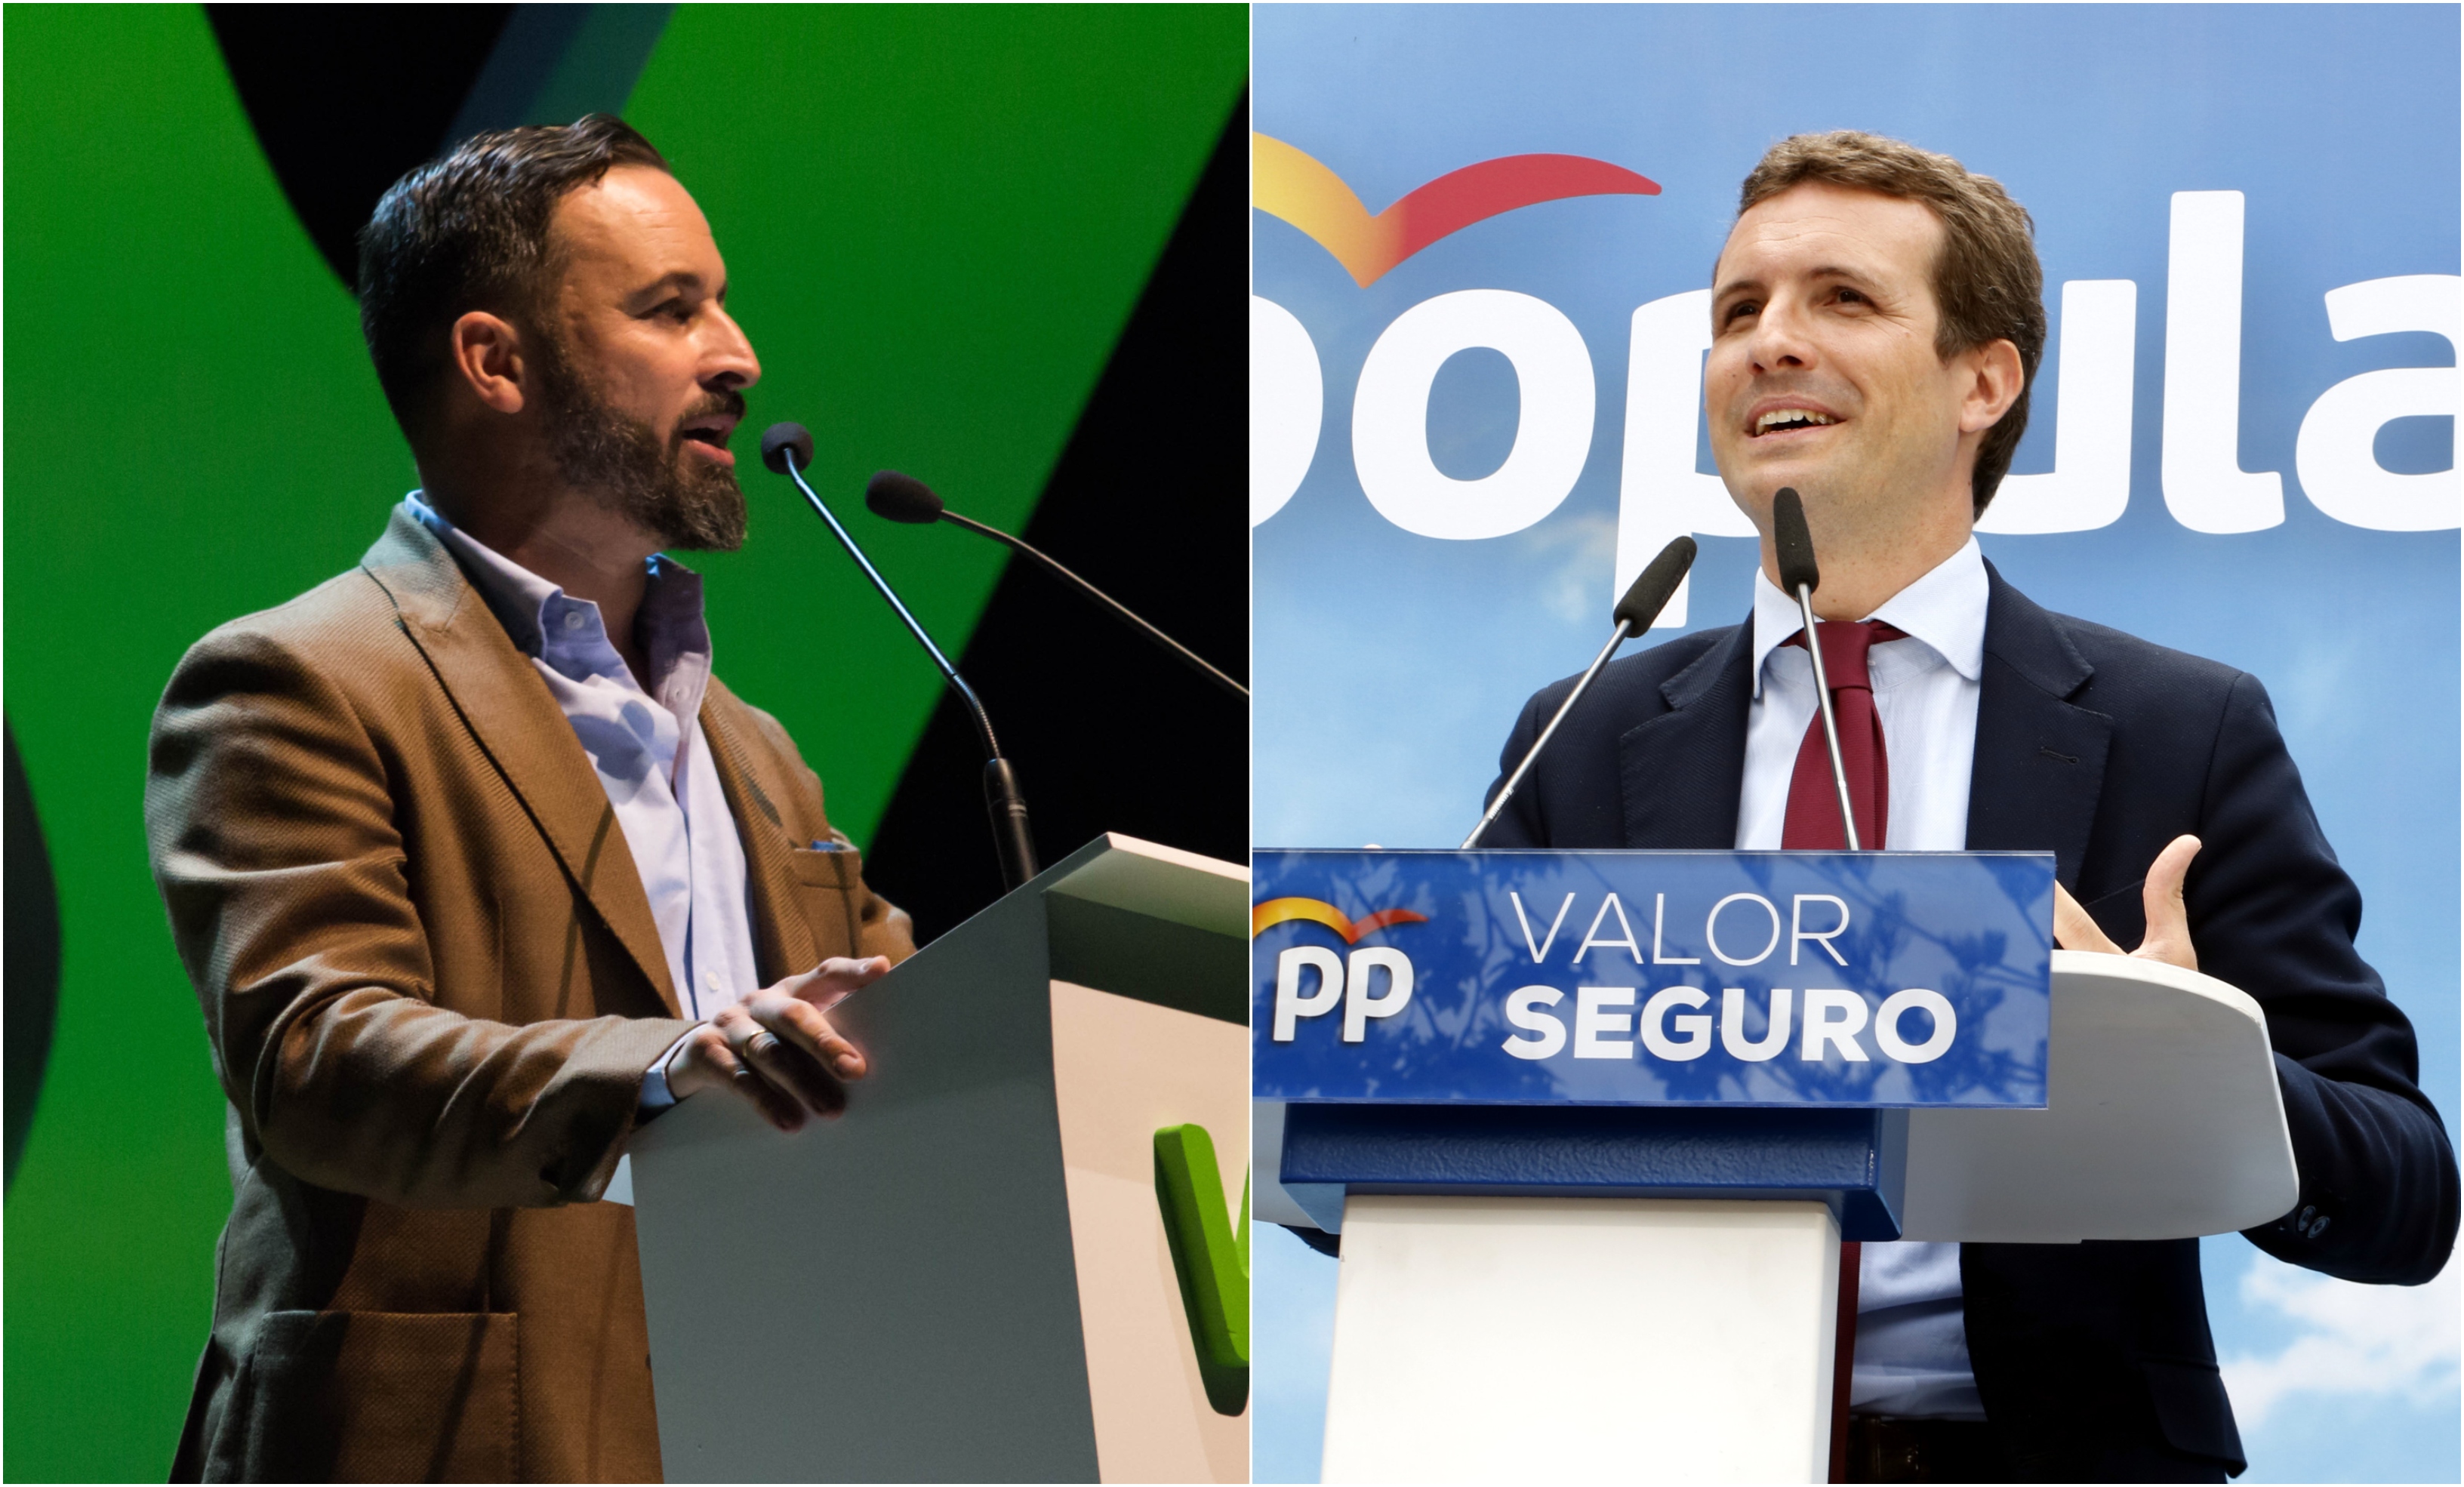 People's Party head Pablo Casado (right) opens doos to government deal with far-right Vox, led by Santiago Abascal (Pictures by Vox and Roger Segura)